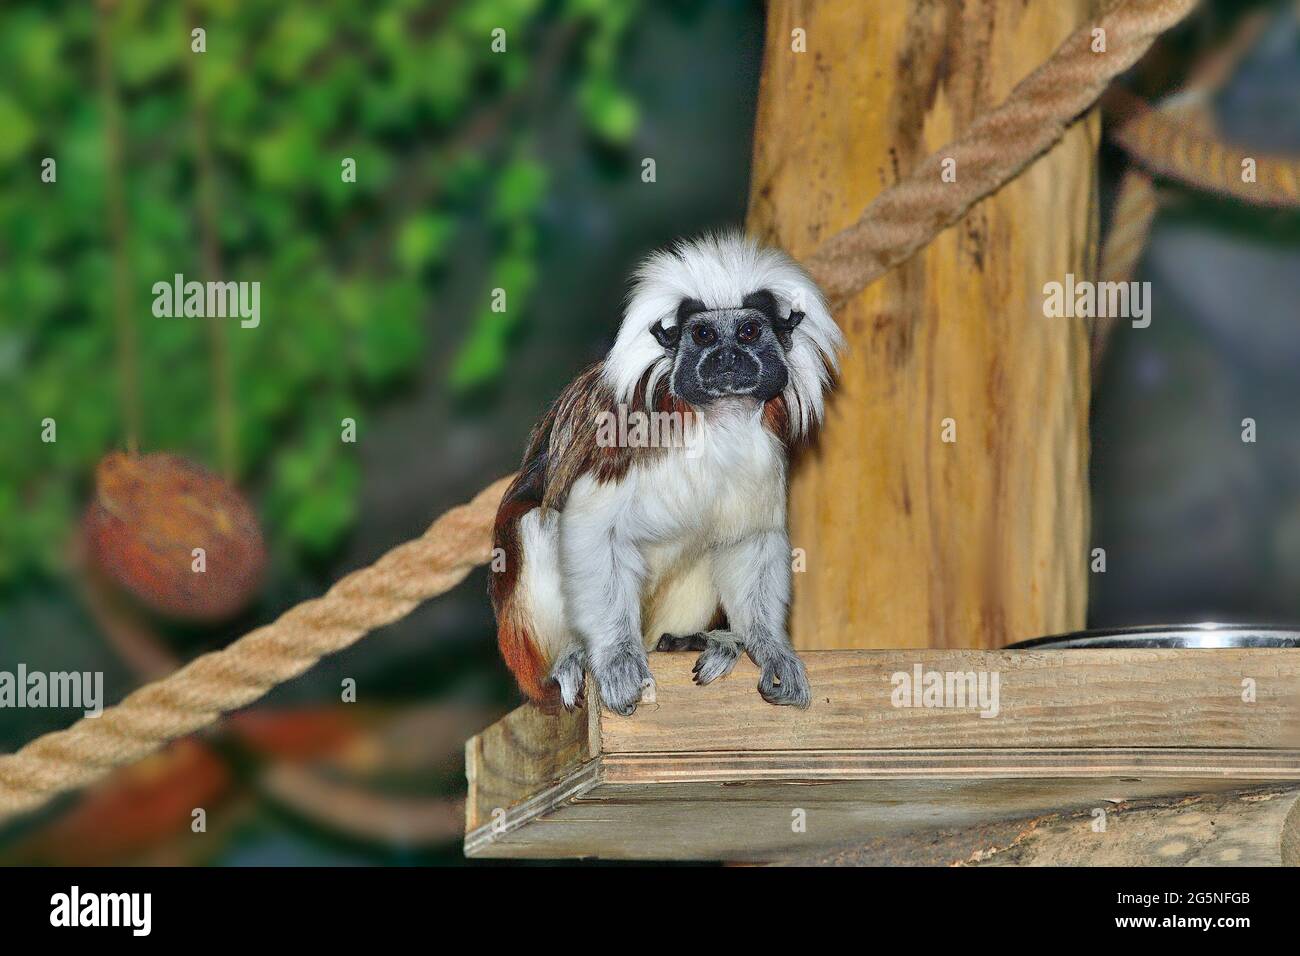 Cotton-top or cotton-headed Tamarin (Saguinus oedipus) is one of the rarest primates. Little funny furry monkey is one of the rarest primates,  lives Stock Photo